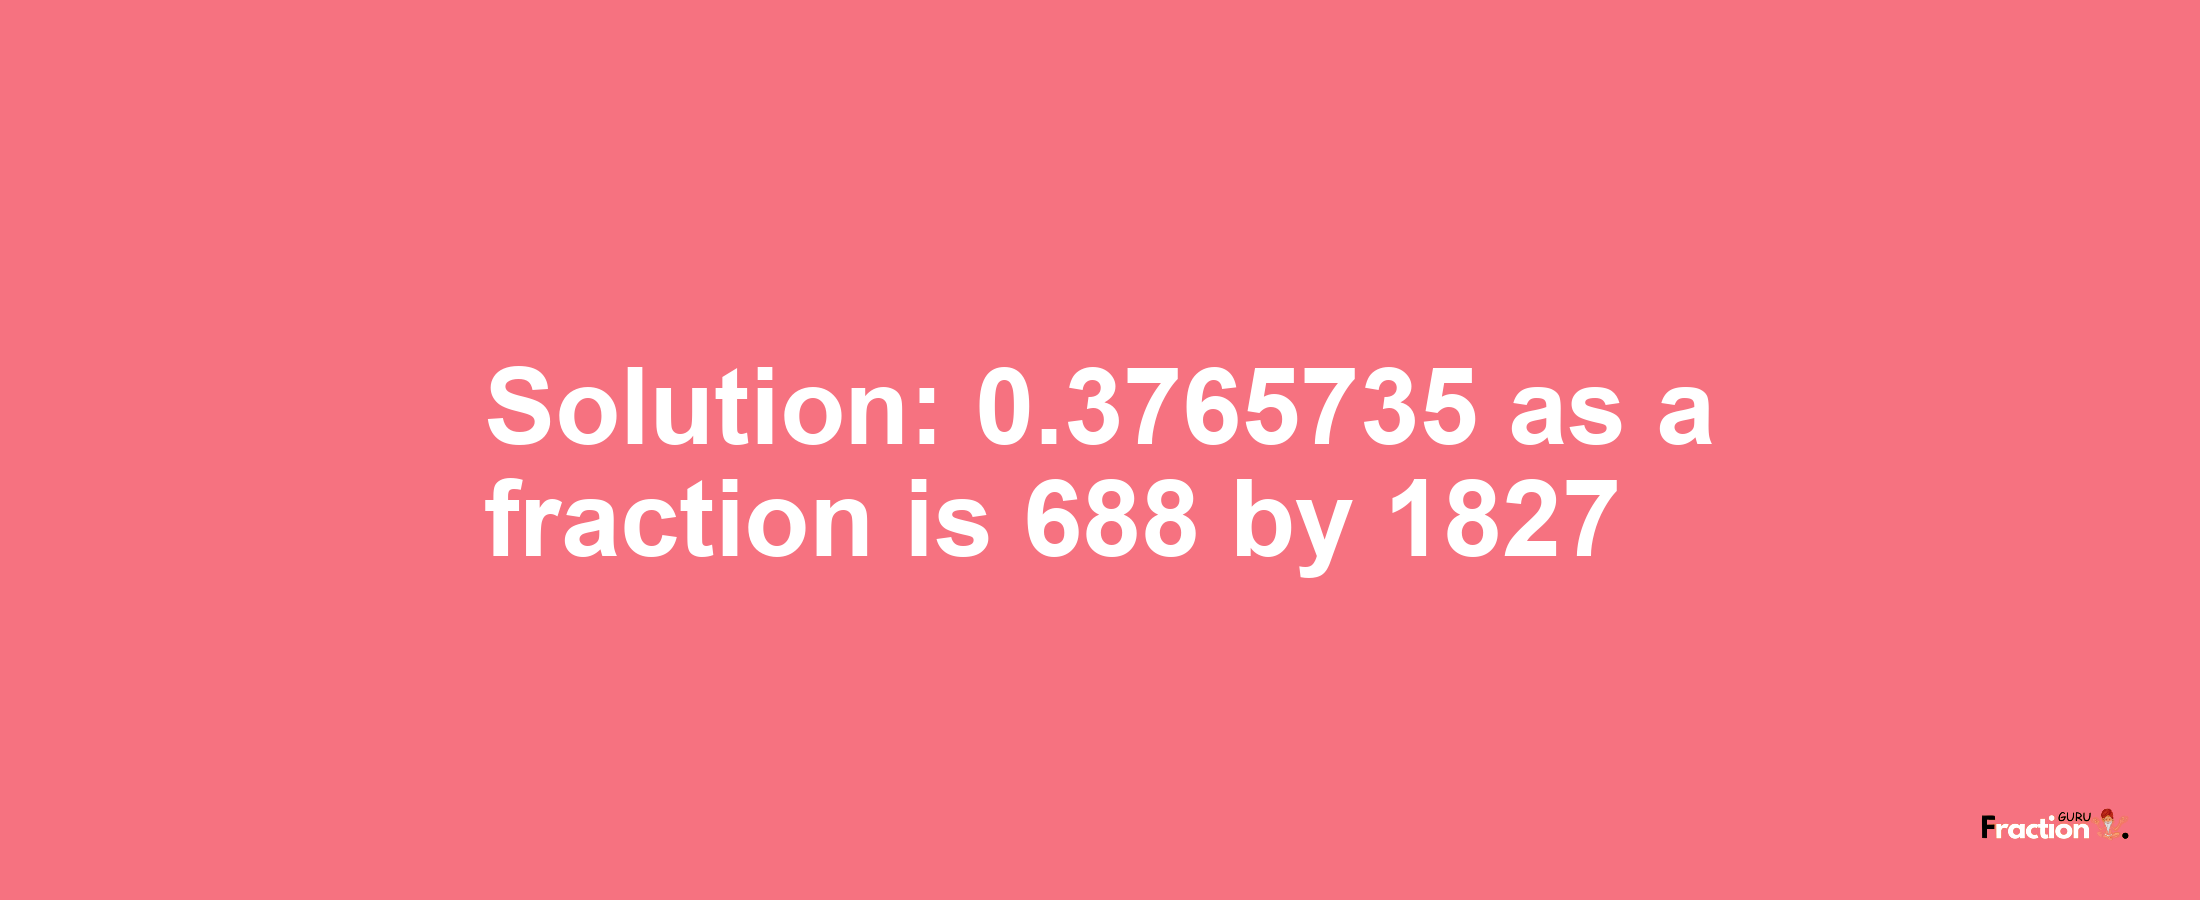 Solution:0.3765735 as a fraction is 688/1827